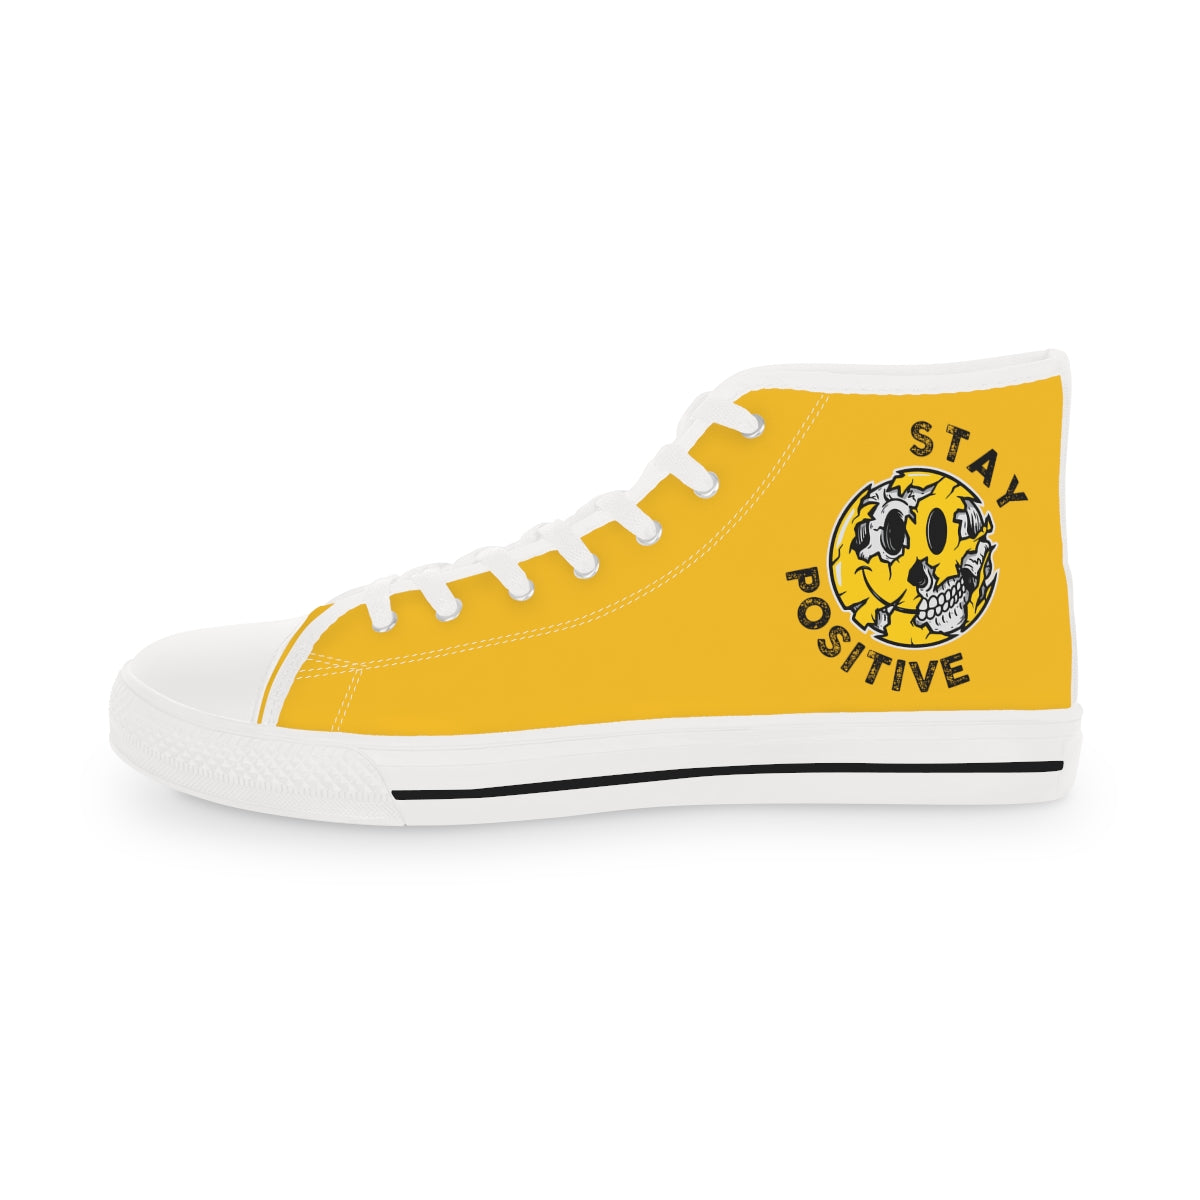 Stay Positive [Yellow] - Men's High Top Sneakers